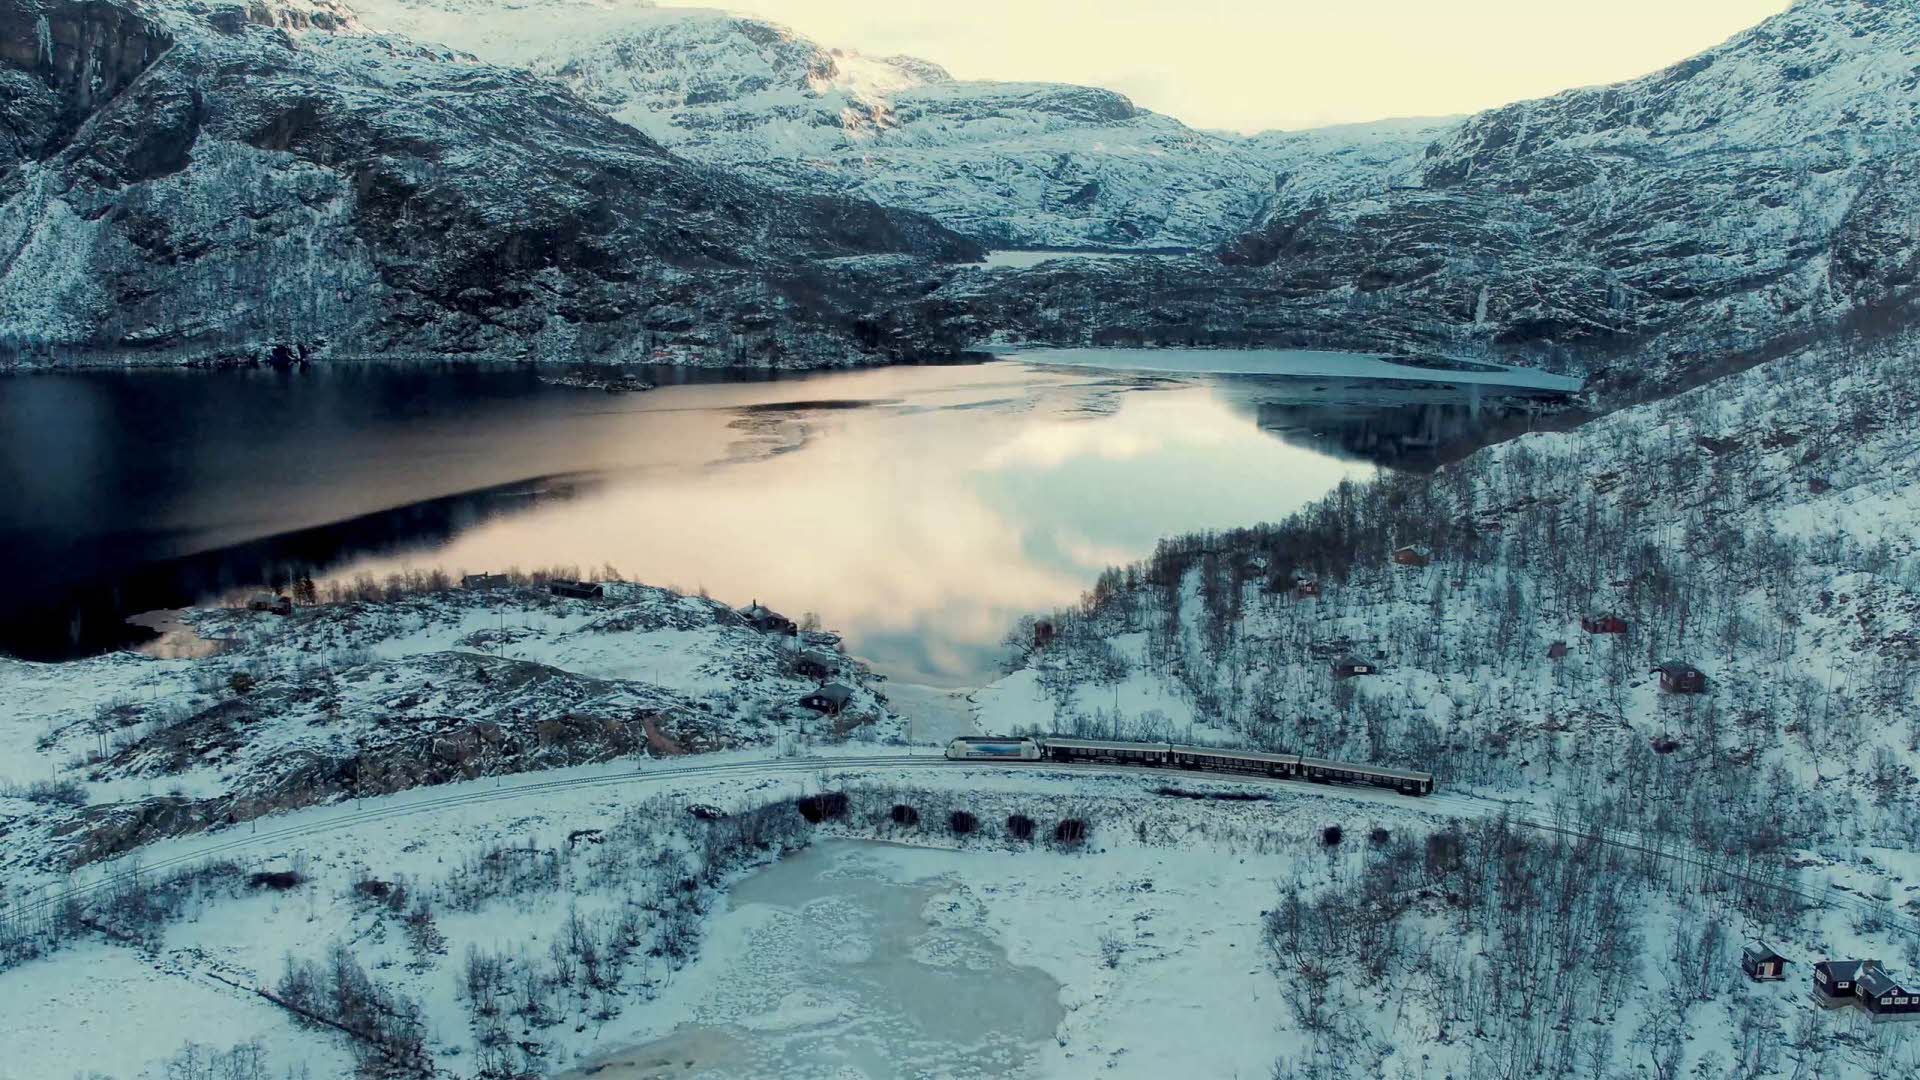 The Flam Railway in cold winter landscape by frozen lake at sunset